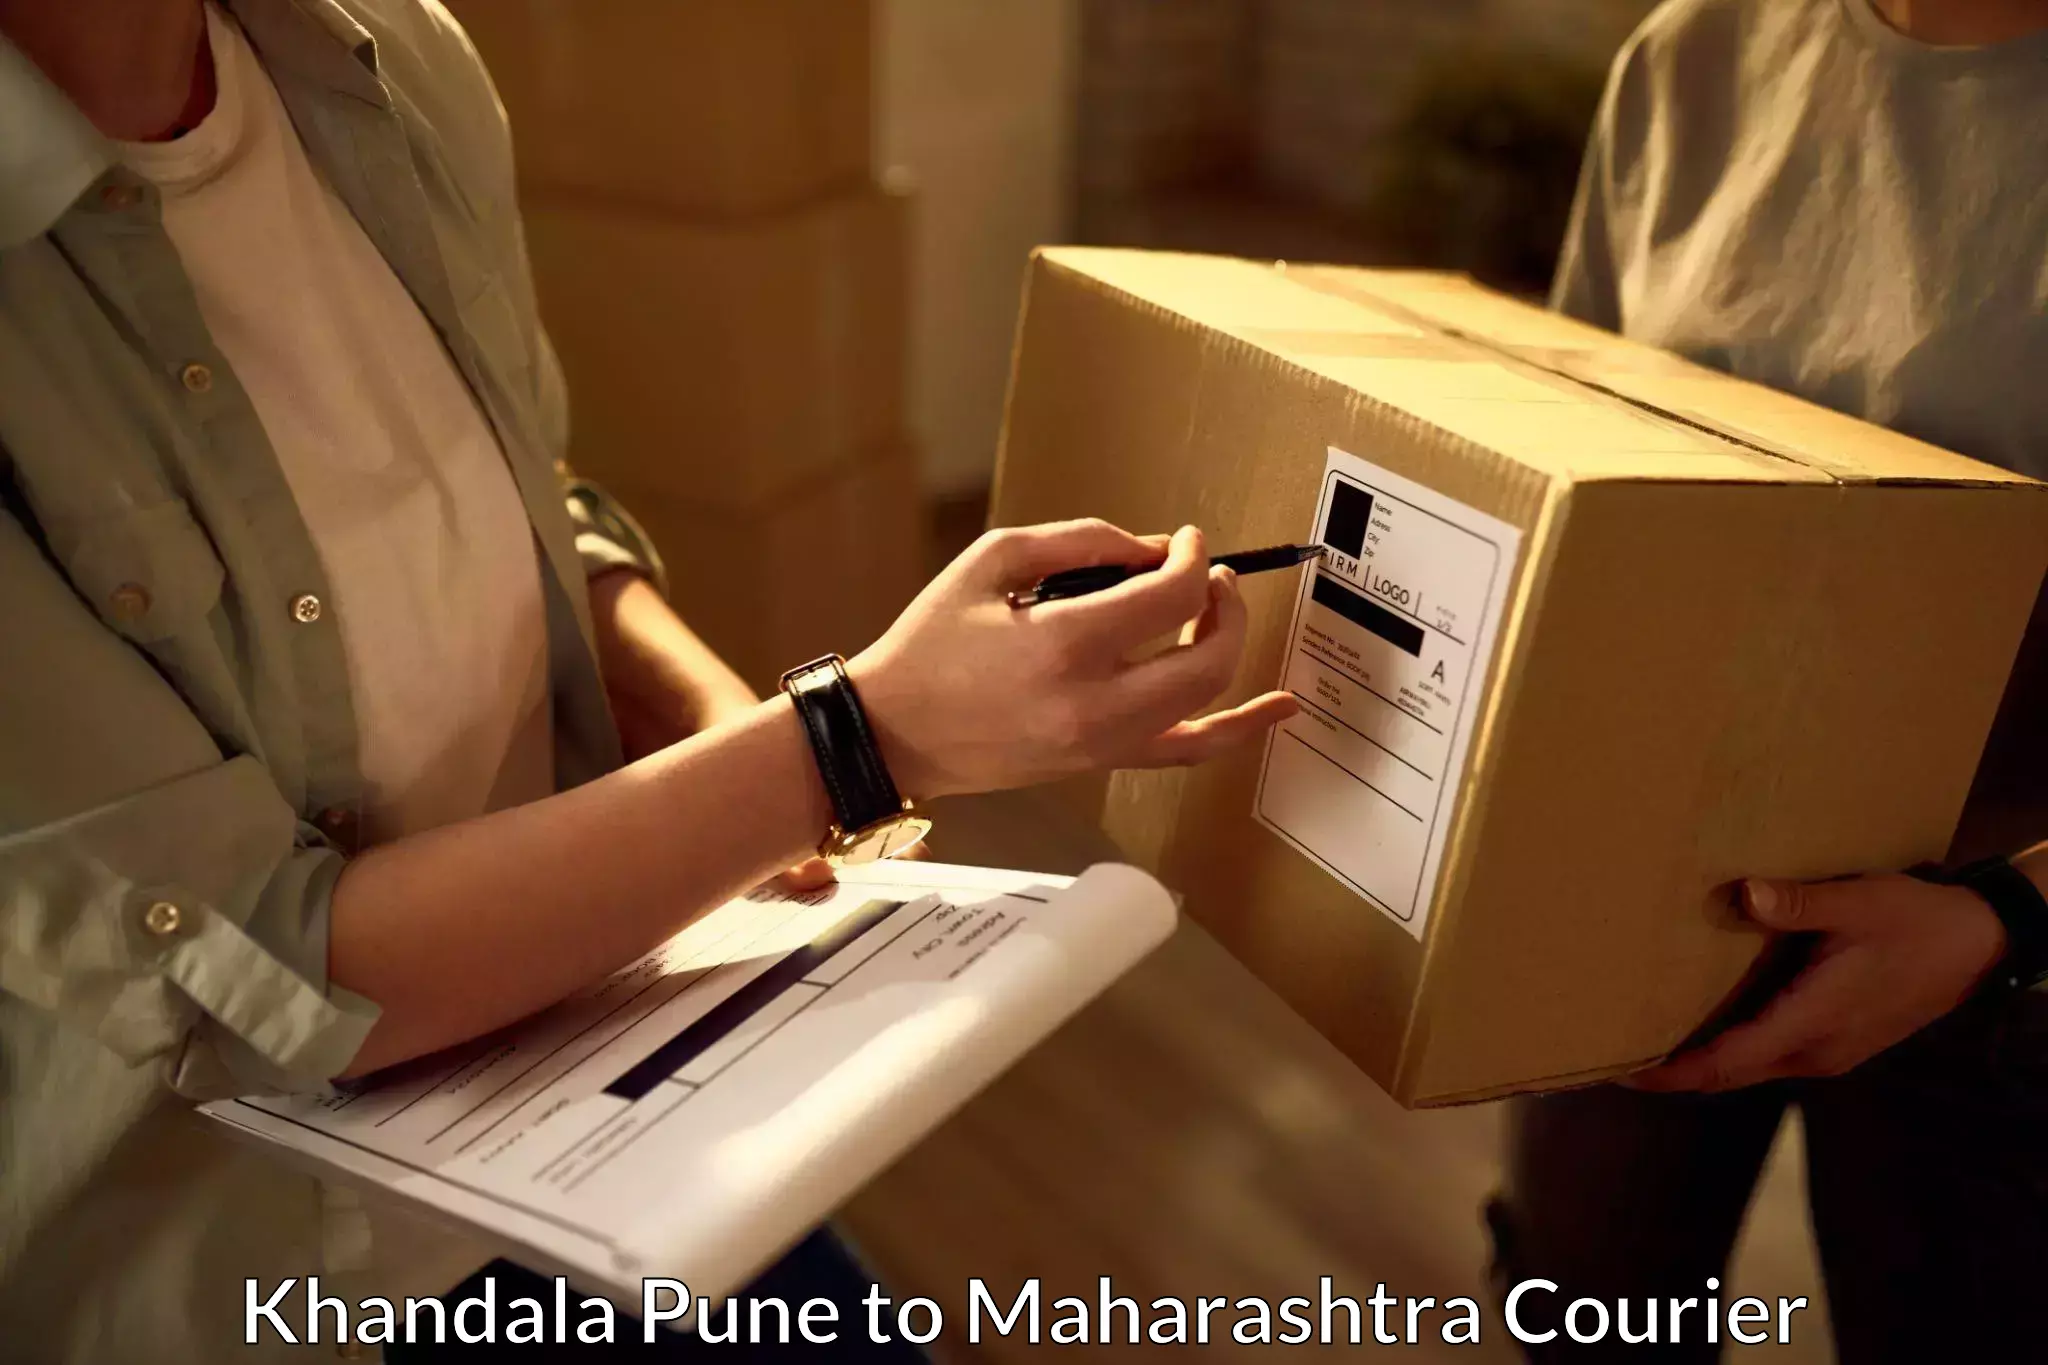 Multi-service courier options in Khandala Pune to Jamkhed